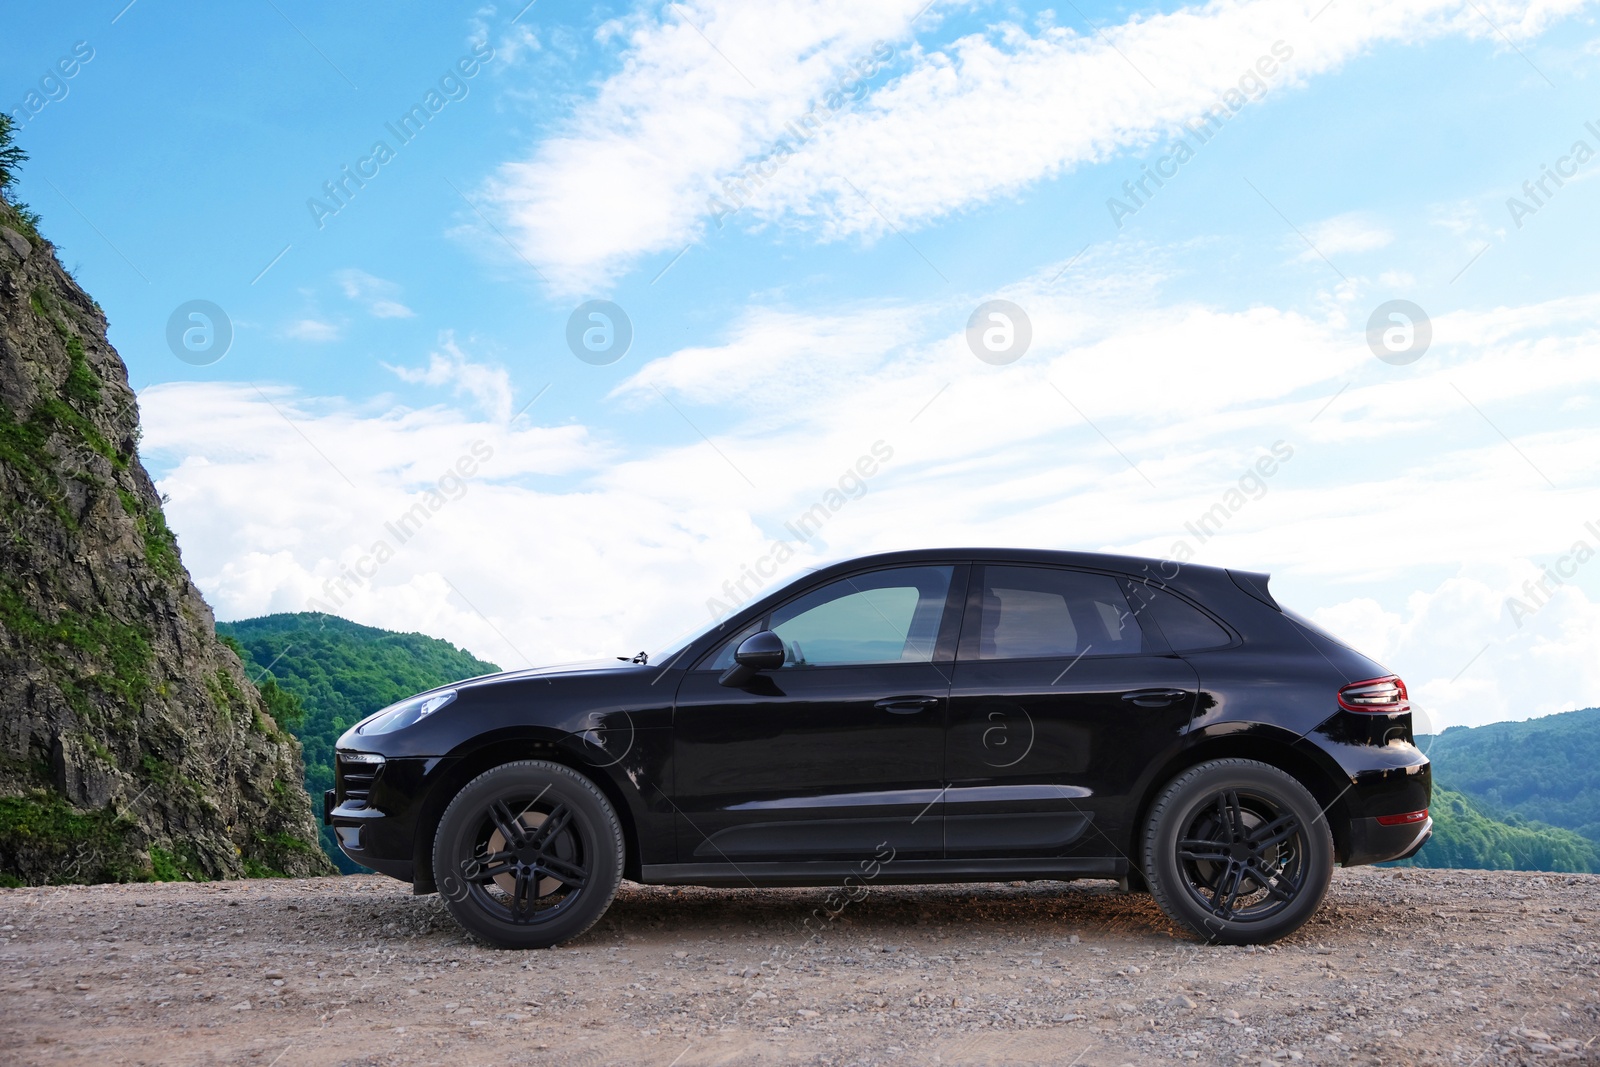 Image of Stylish modern car on road in mountains